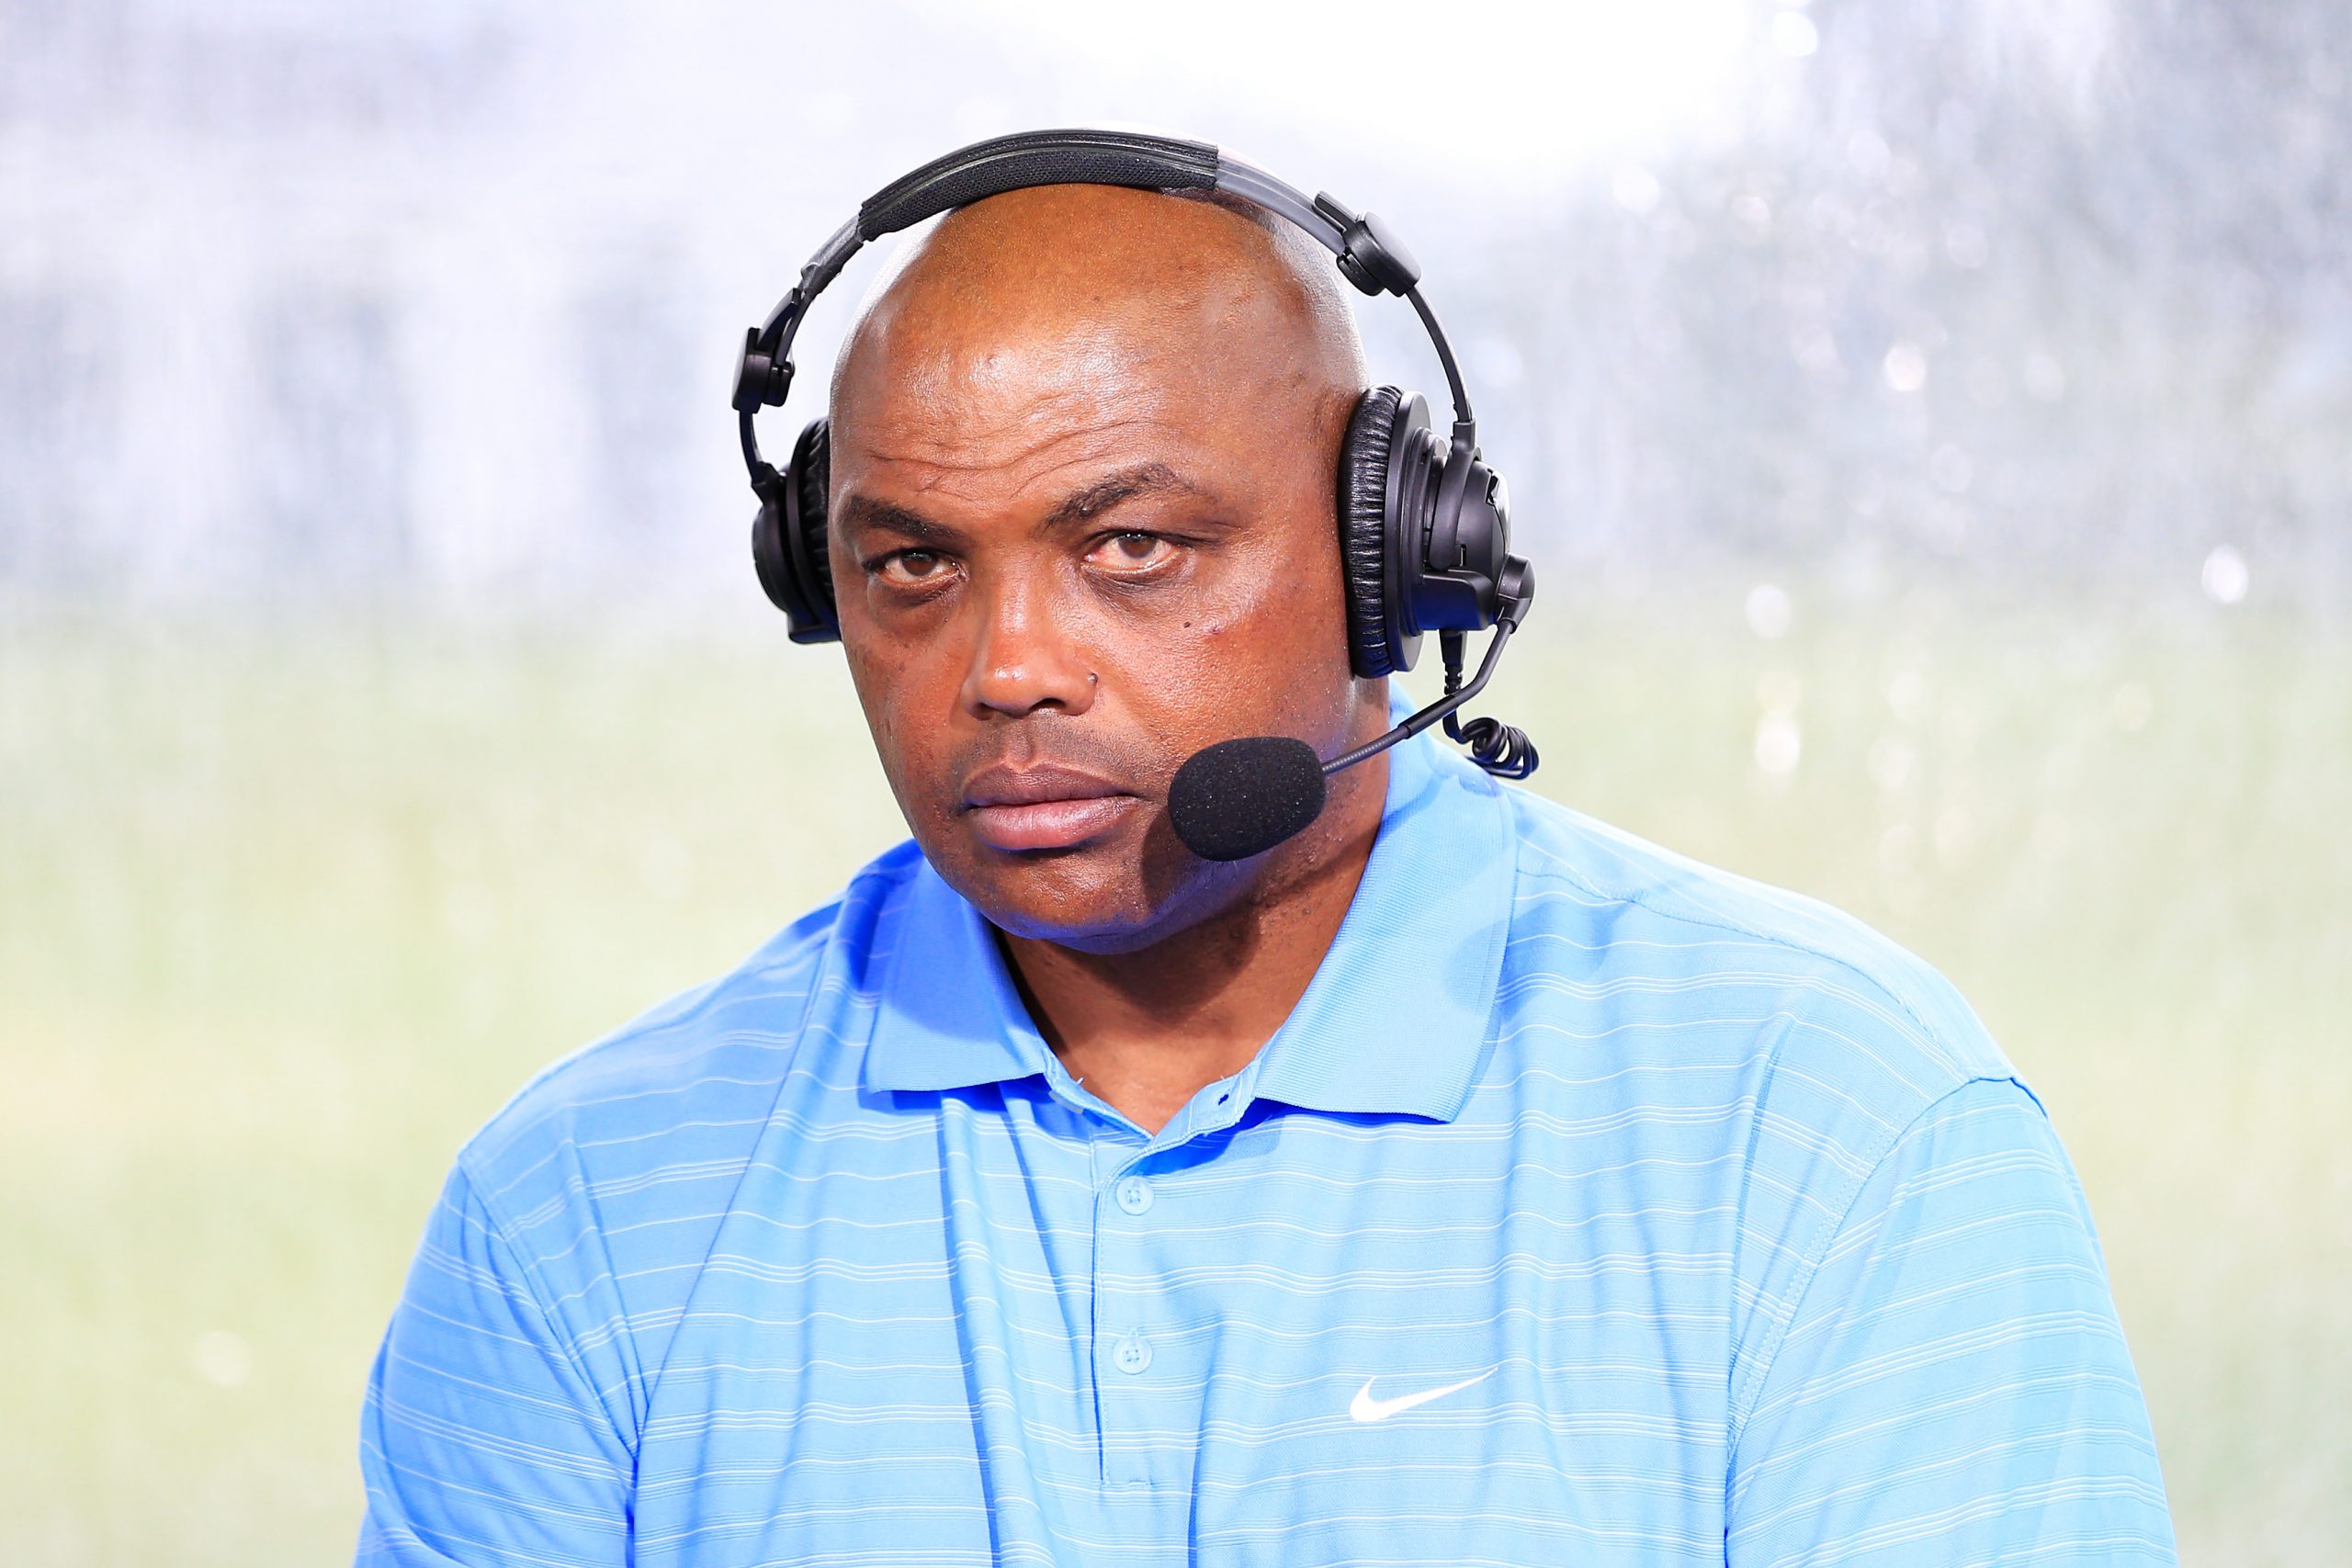 Charles Barkley commentates from the booth during The Match.